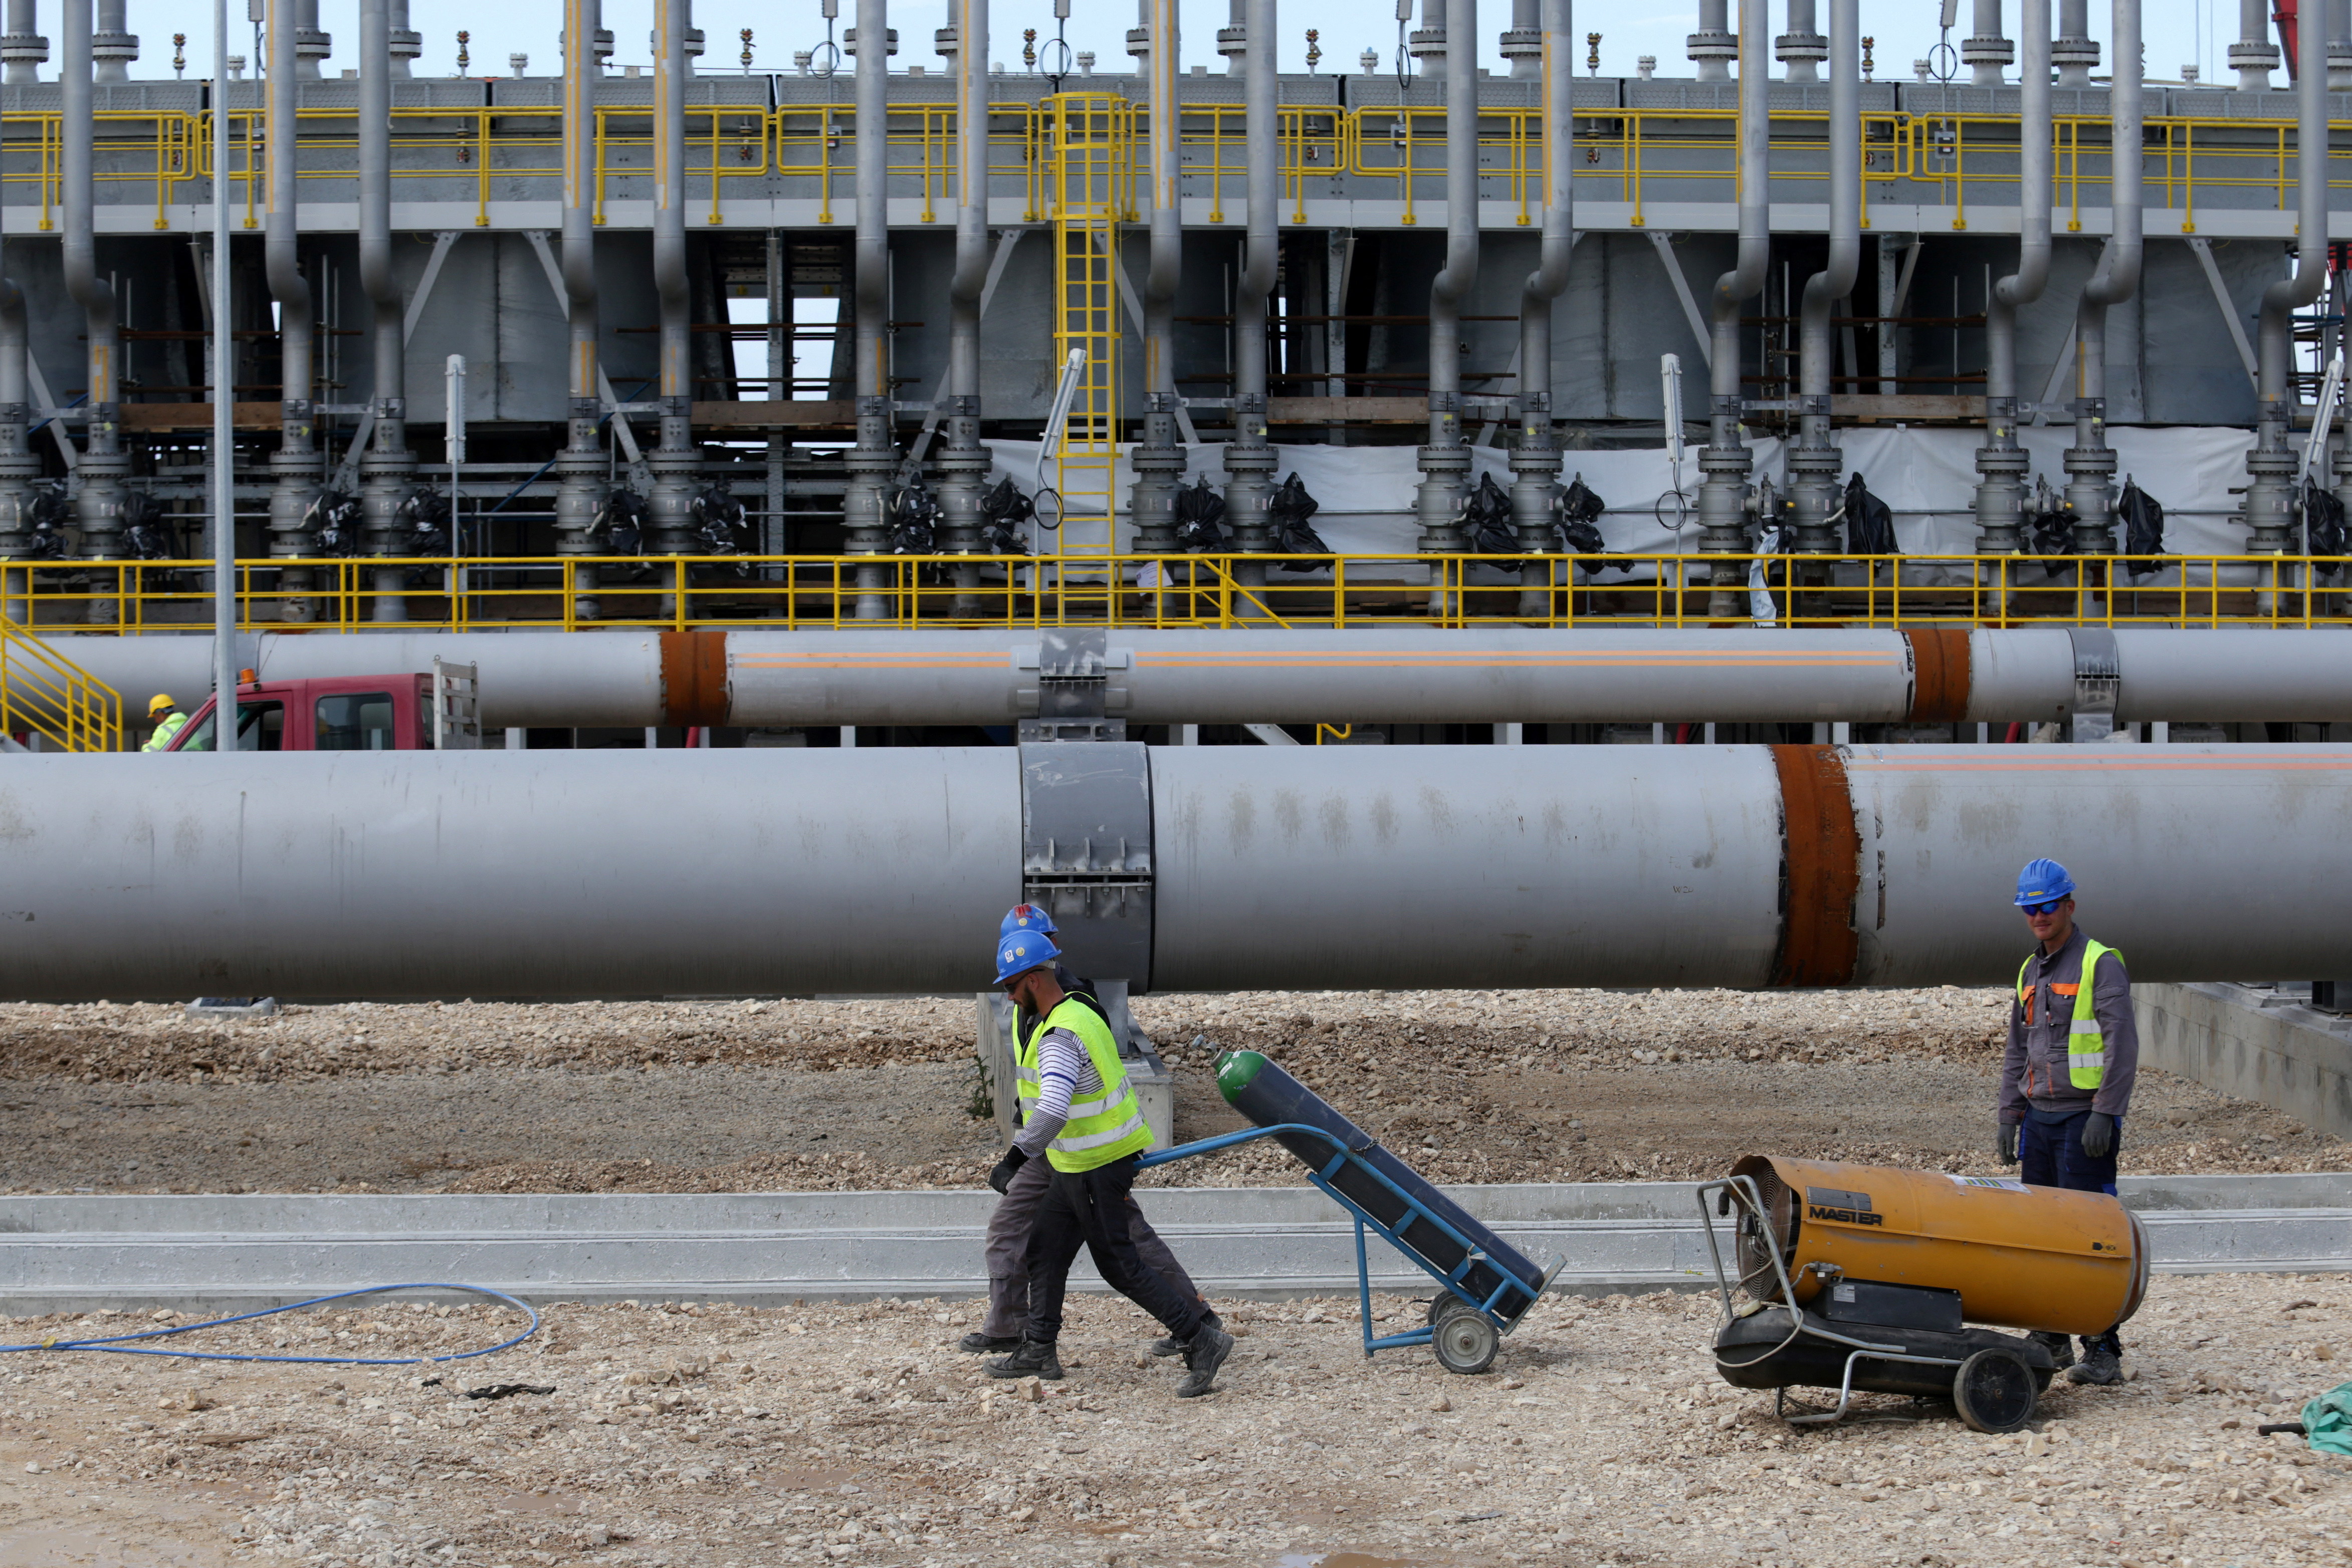 Local employees work at a compressor station of the Trans Adriatic Pipeline in Seman